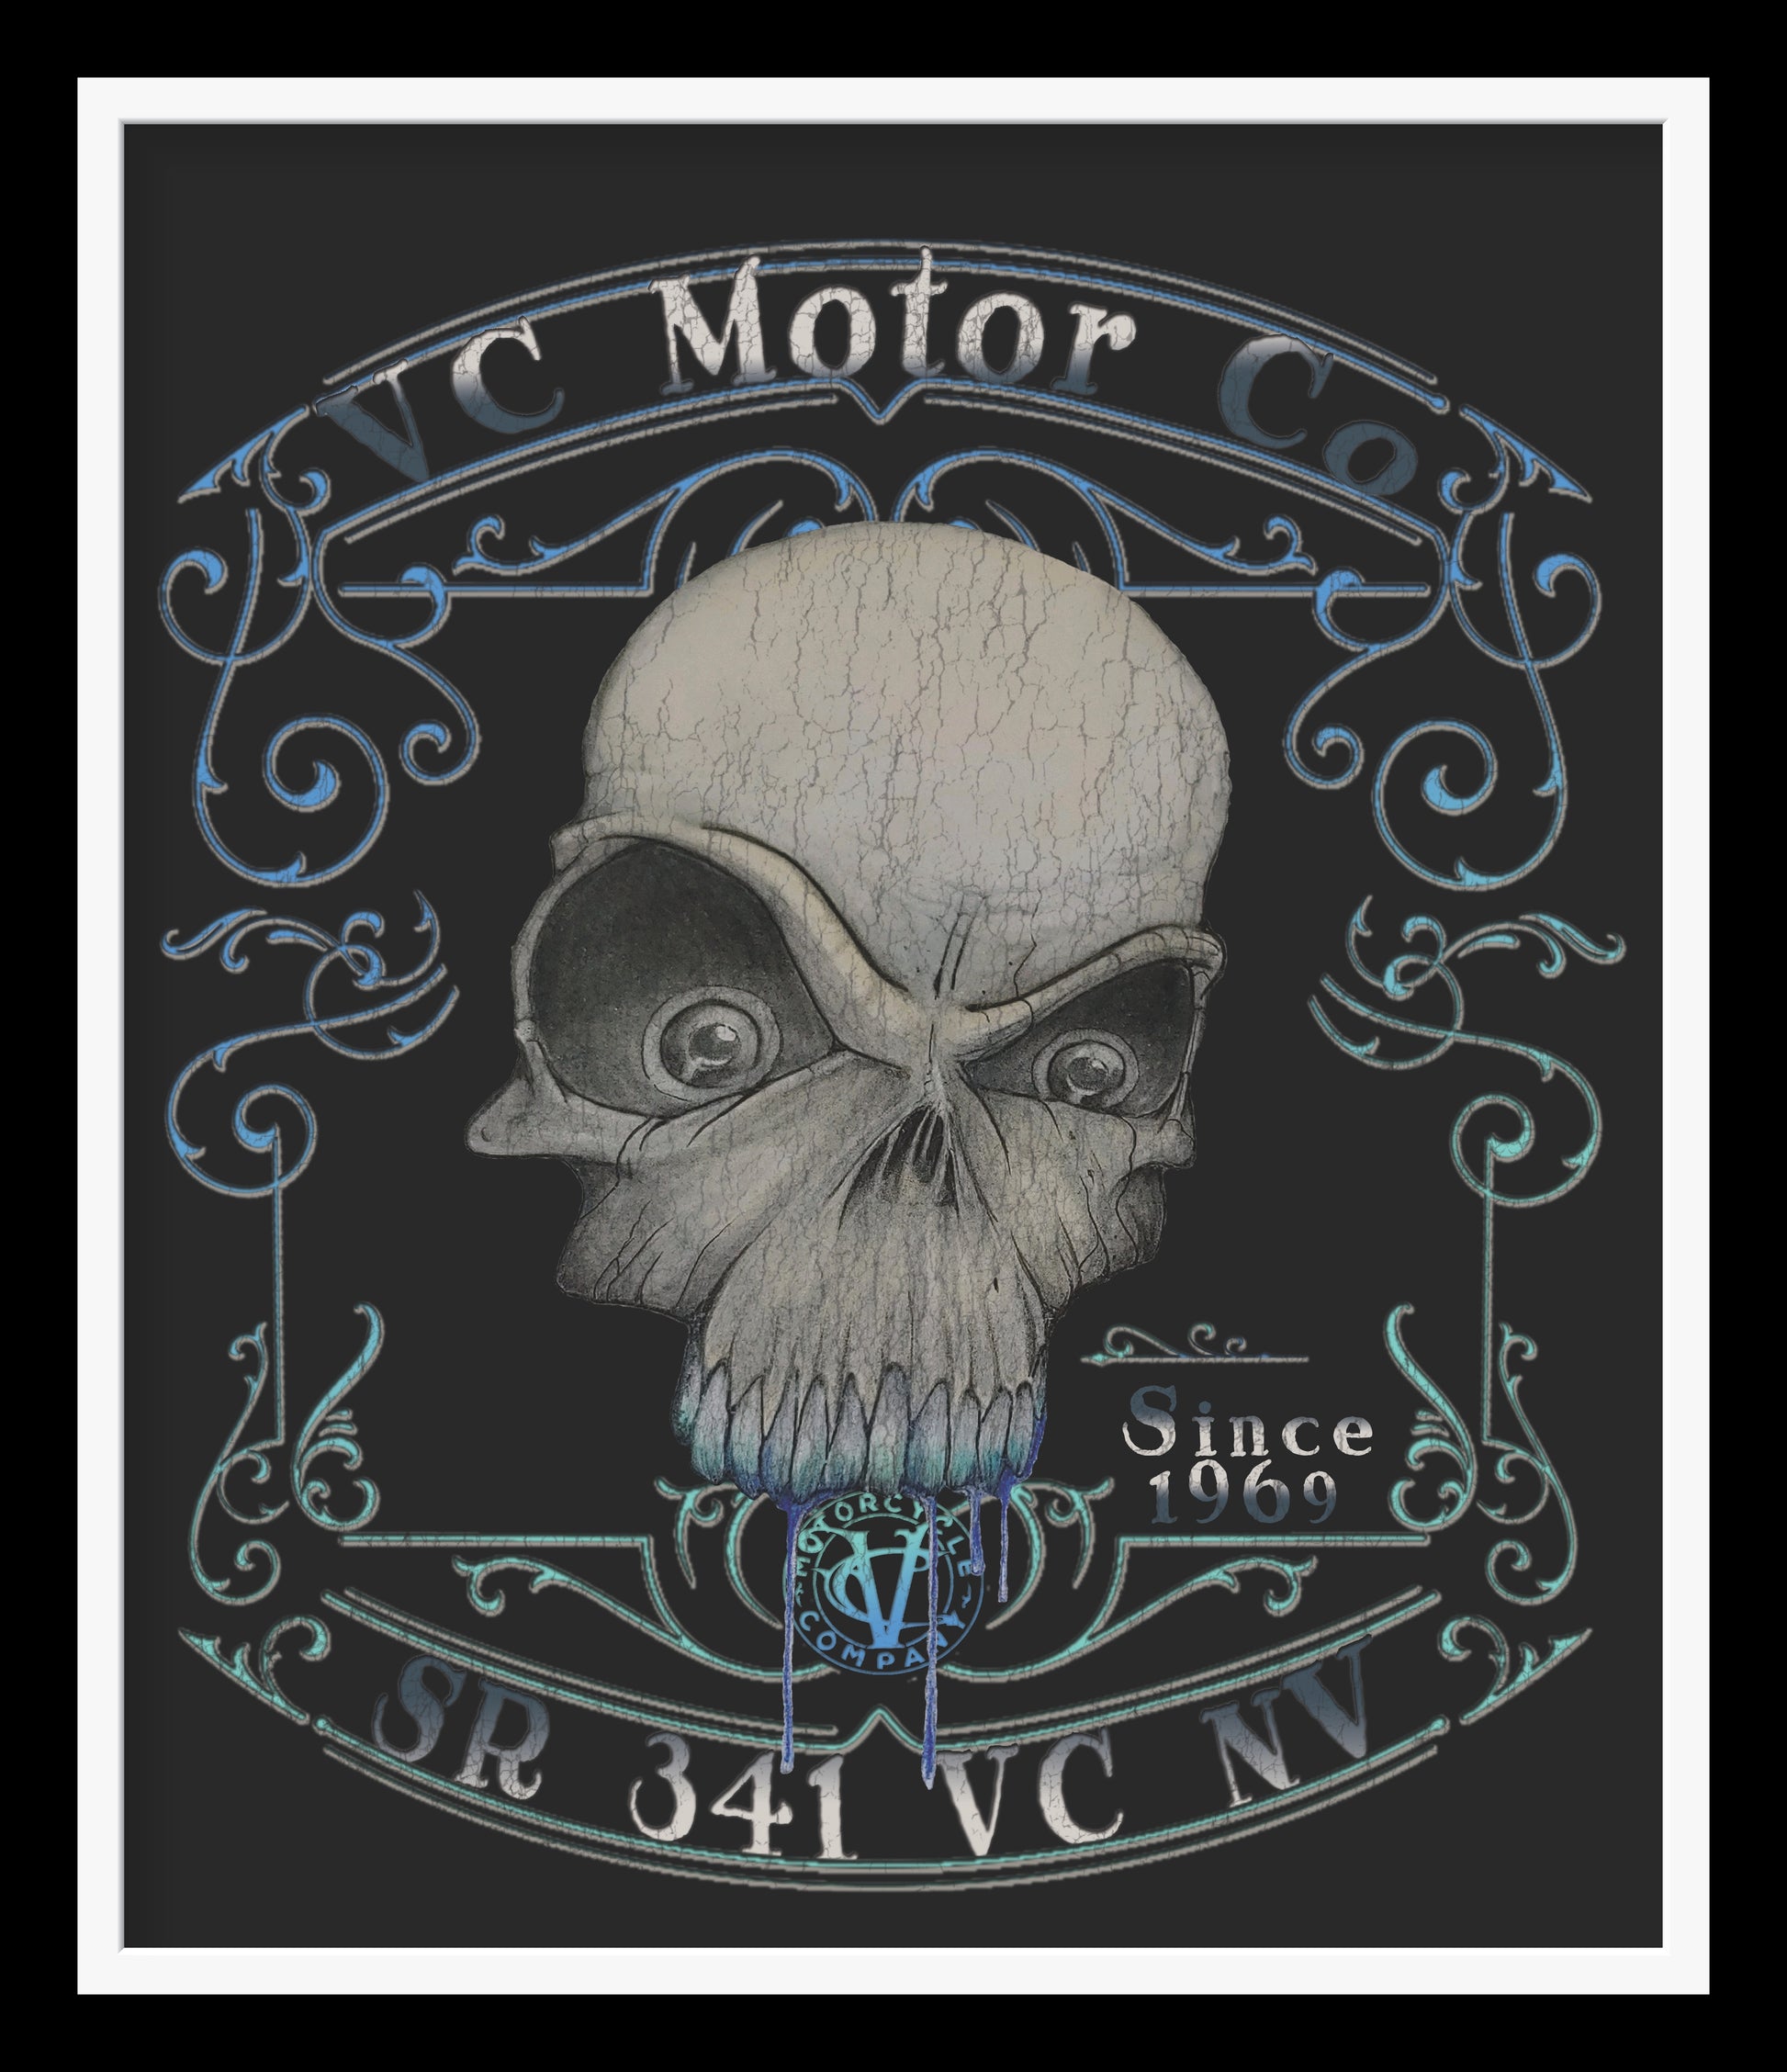 Toxic Skull with Scroll Work pillow Virginia City Motorcycle Company Apparel 